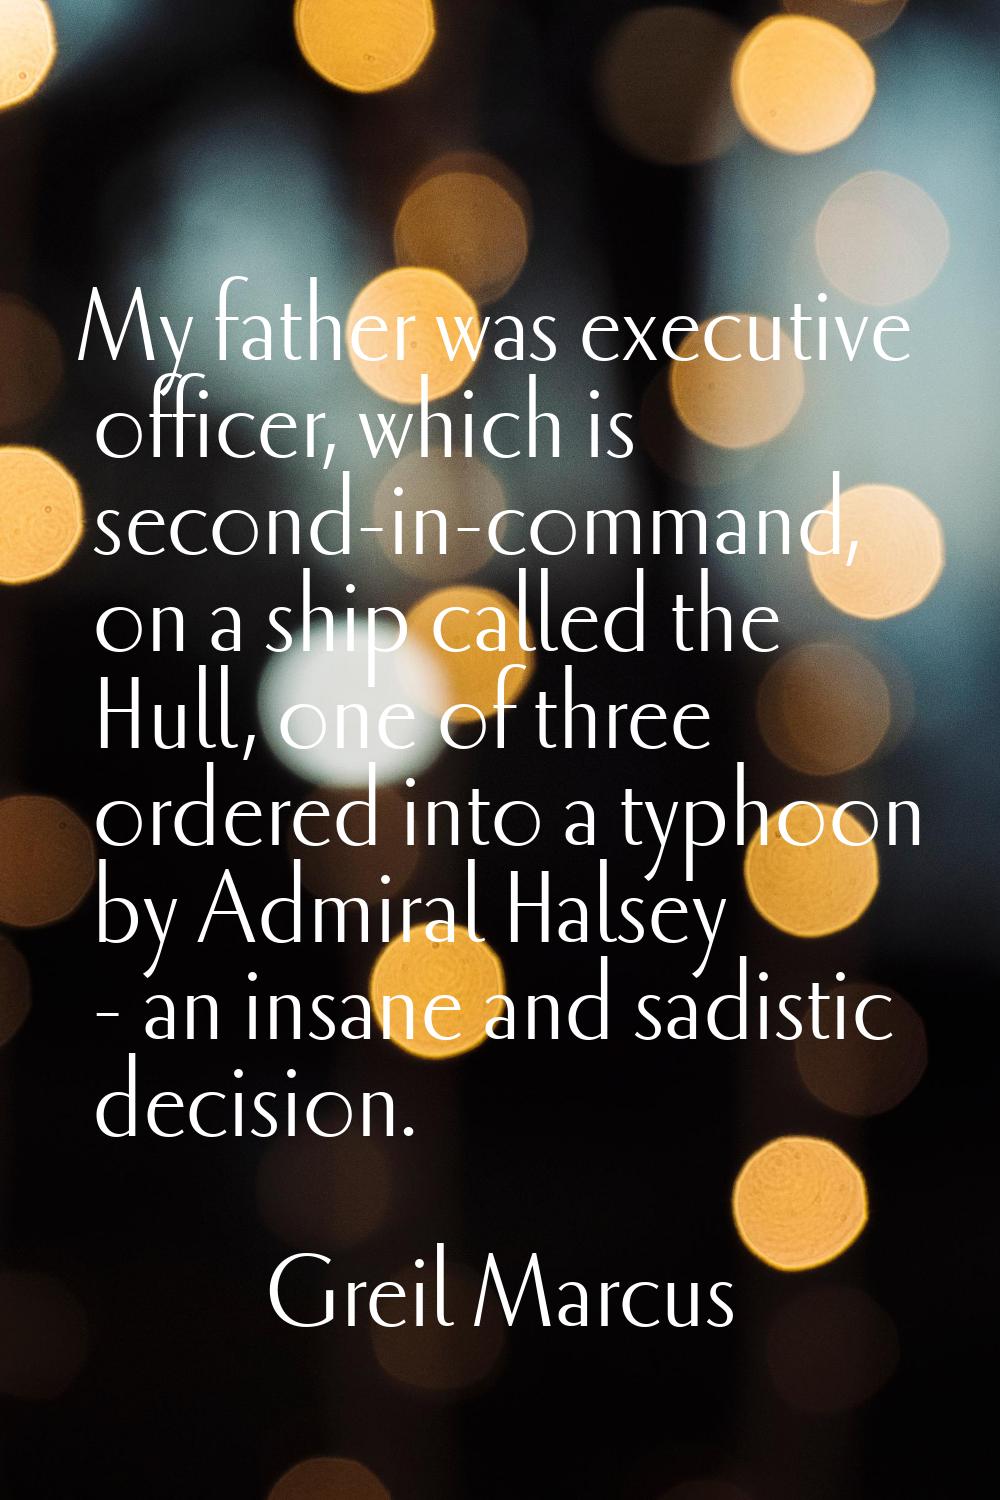 My father was executive officer, which is second-in-command, on a ship called the Hull, one of thre